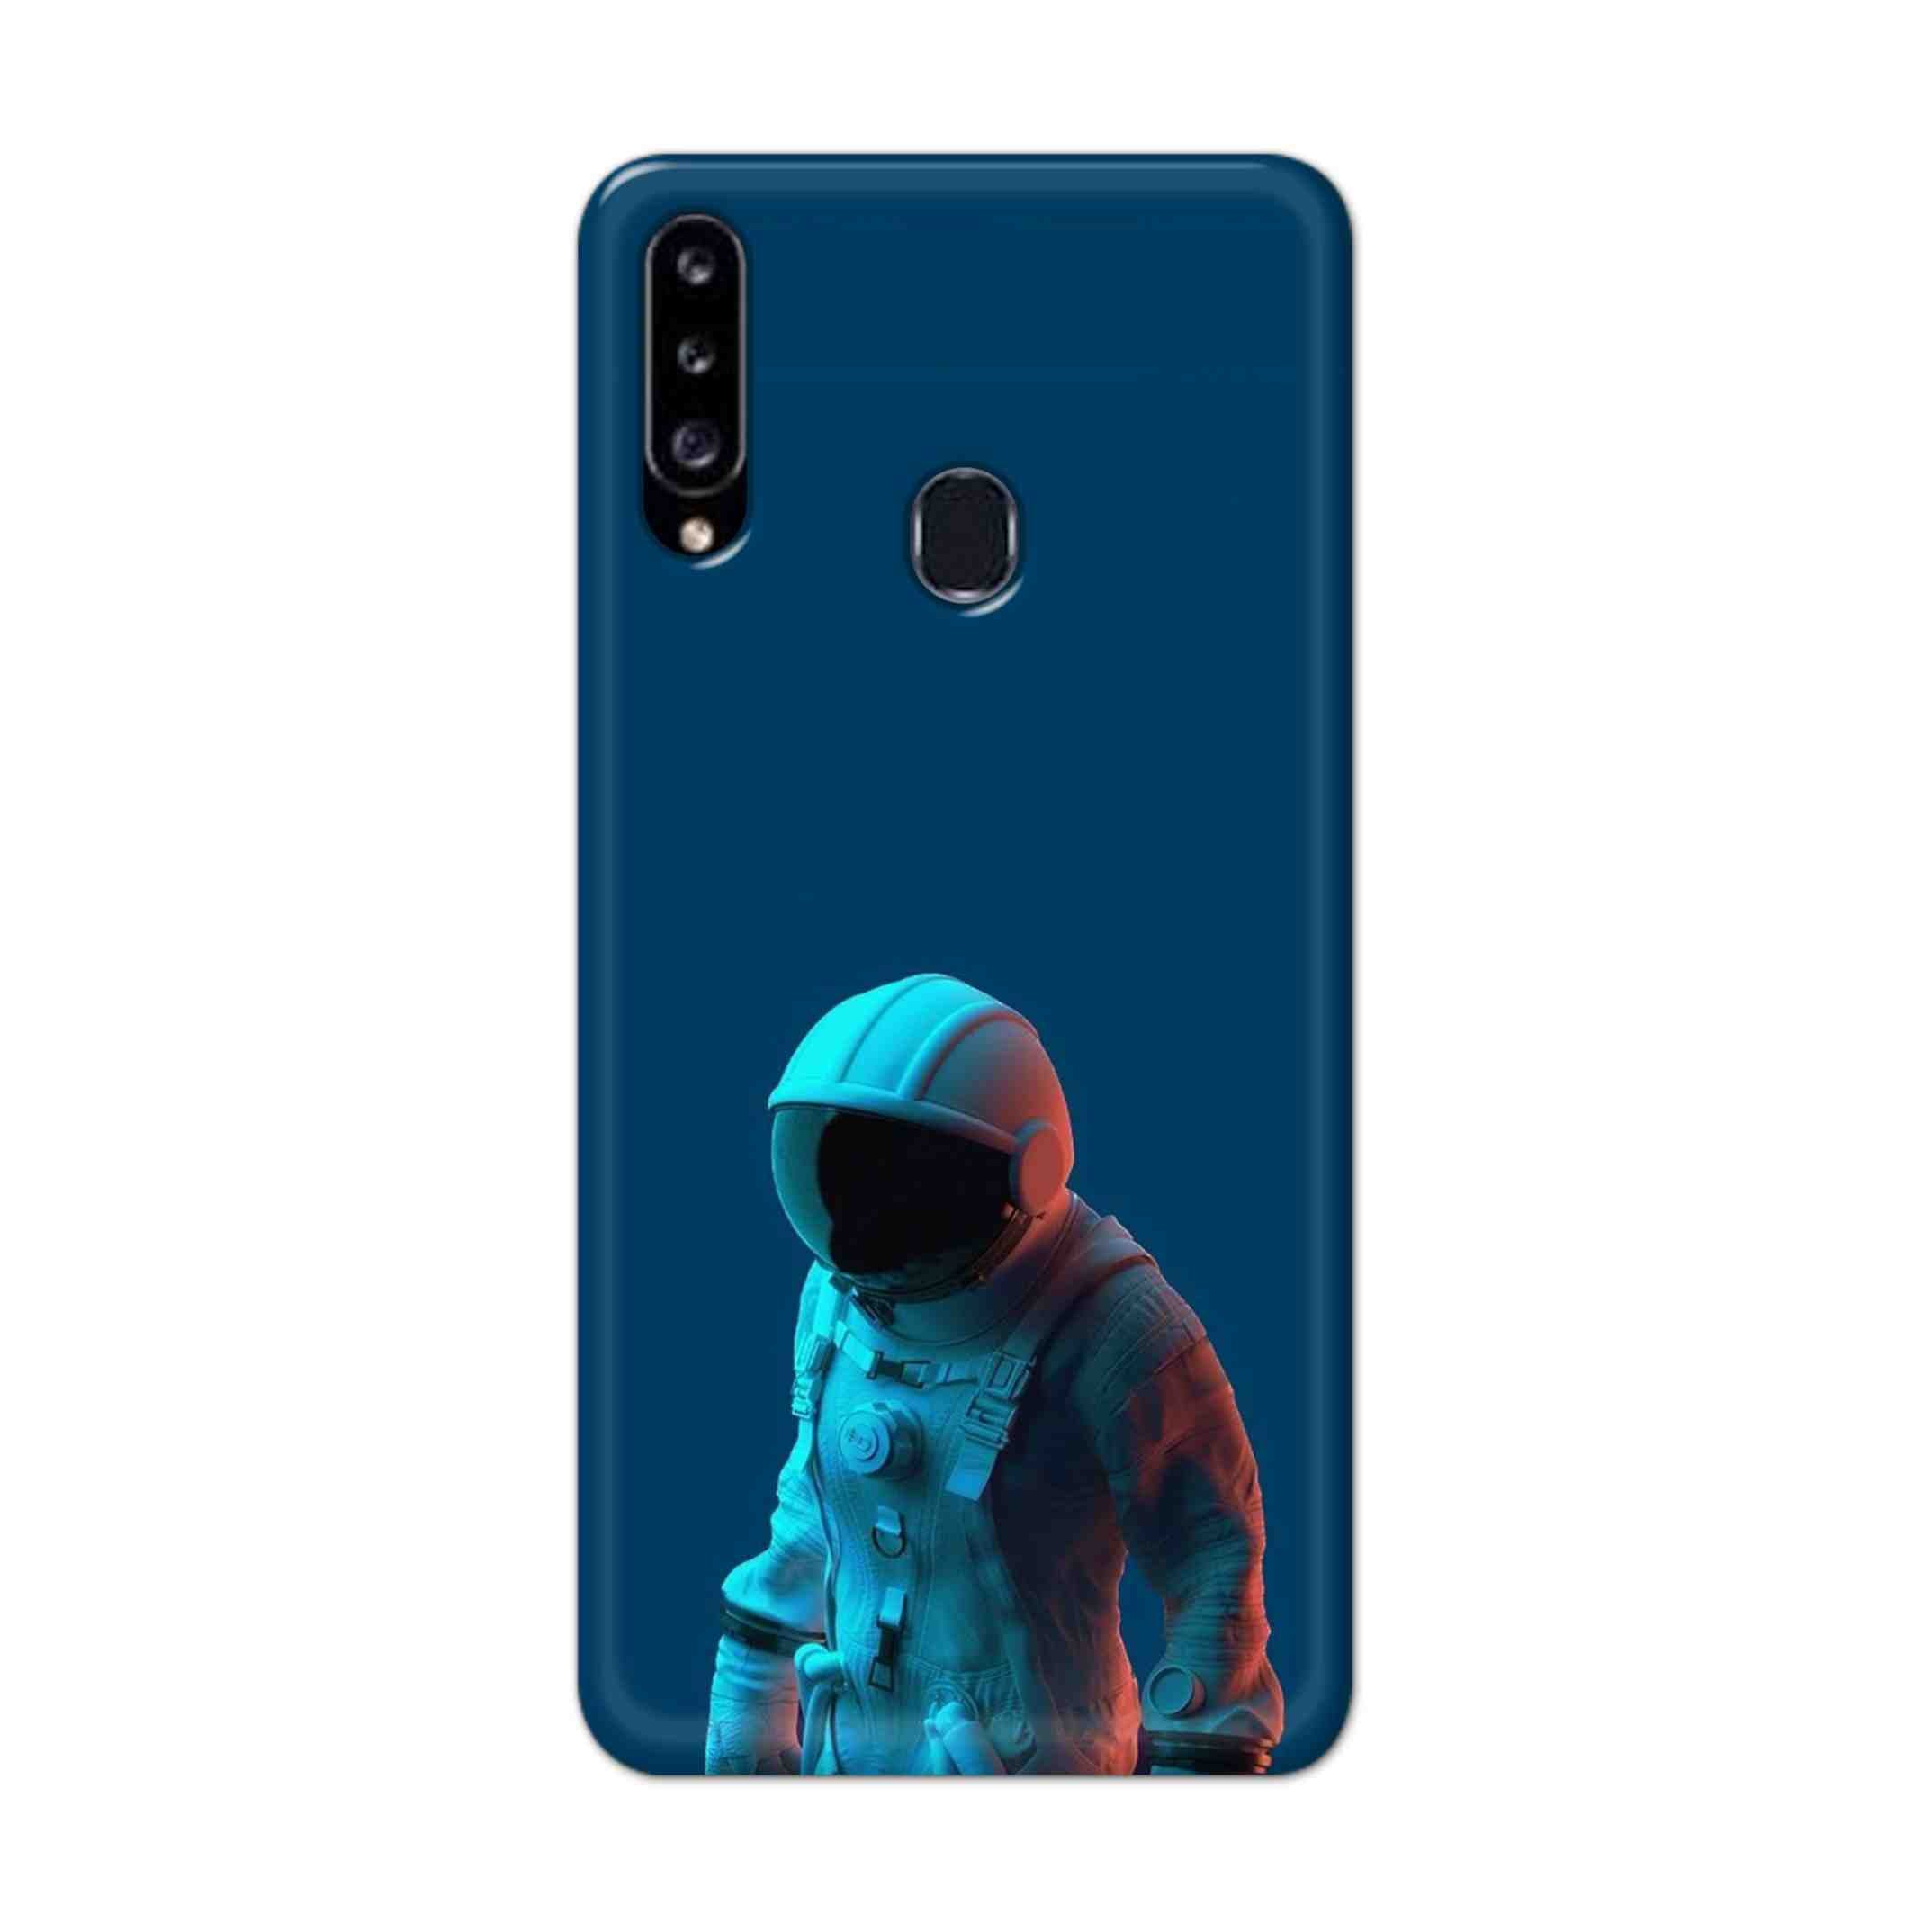 Buy Blue Astronaut Hard Back Mobile Phone Case Cover For Samsung Galaxy A21 Online